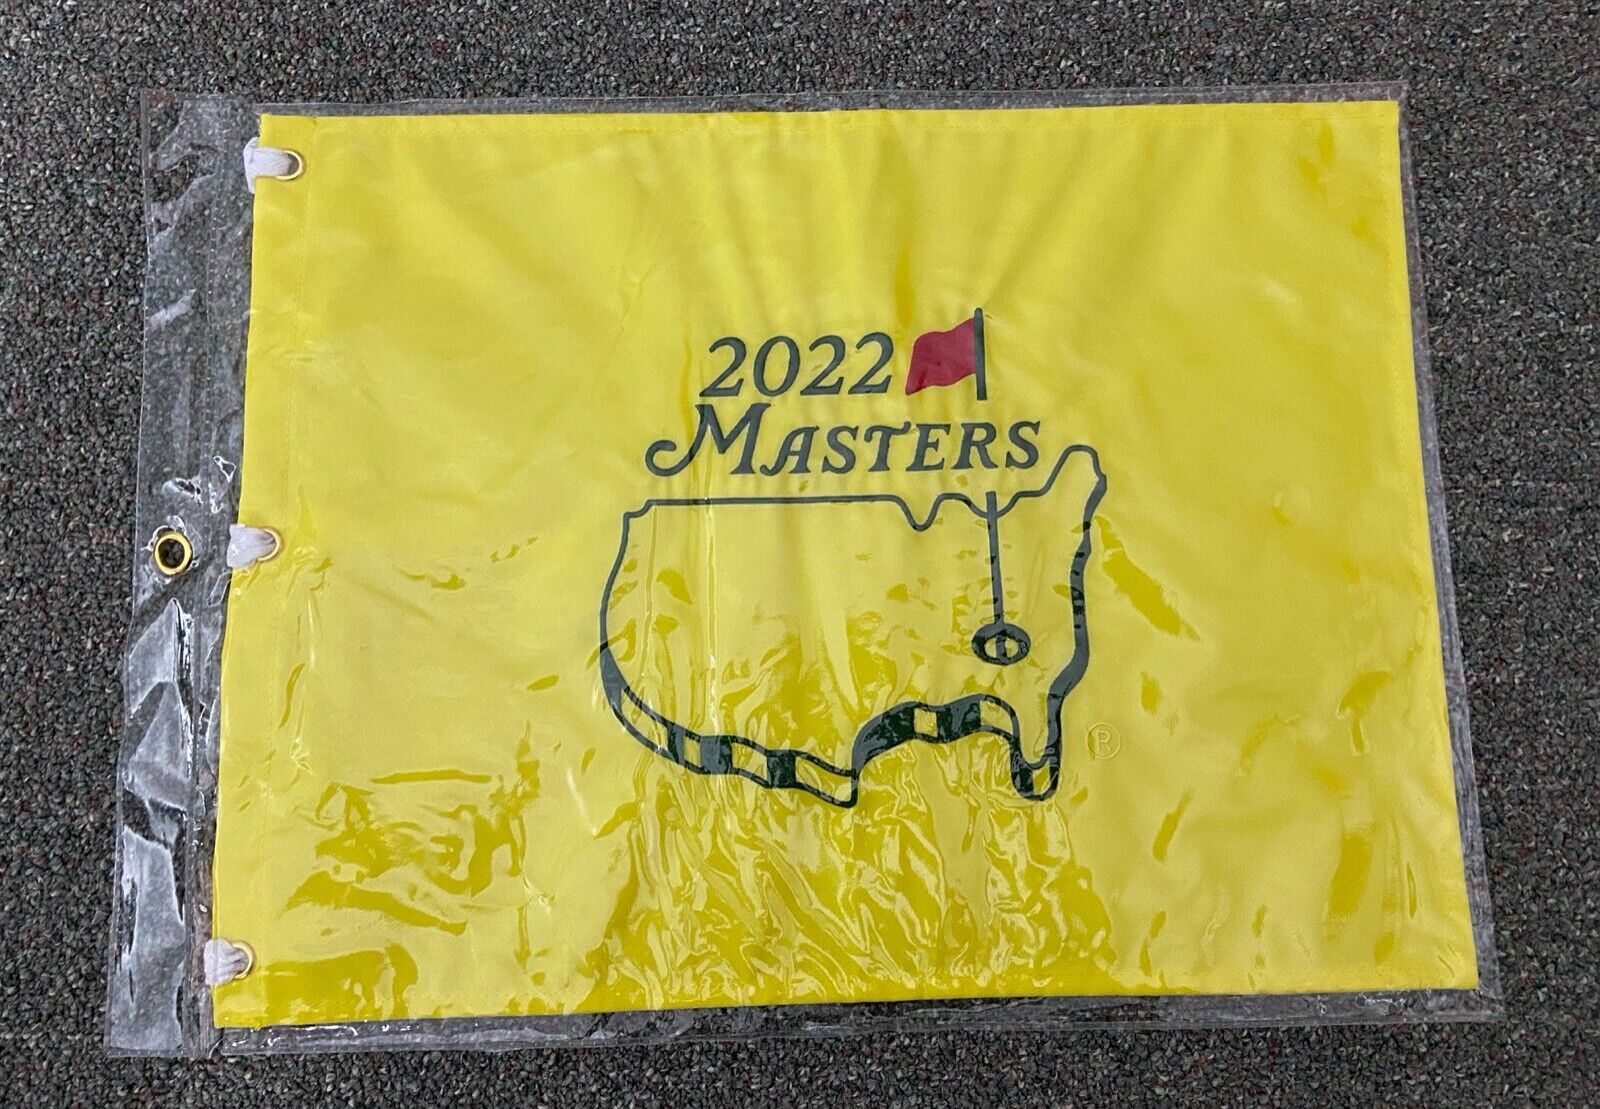 2022 MASTERS EMBROIDERED GOLF PIN FLAG AUGUSTA NATIONAL GOLF CLUB TIGER WOODS 